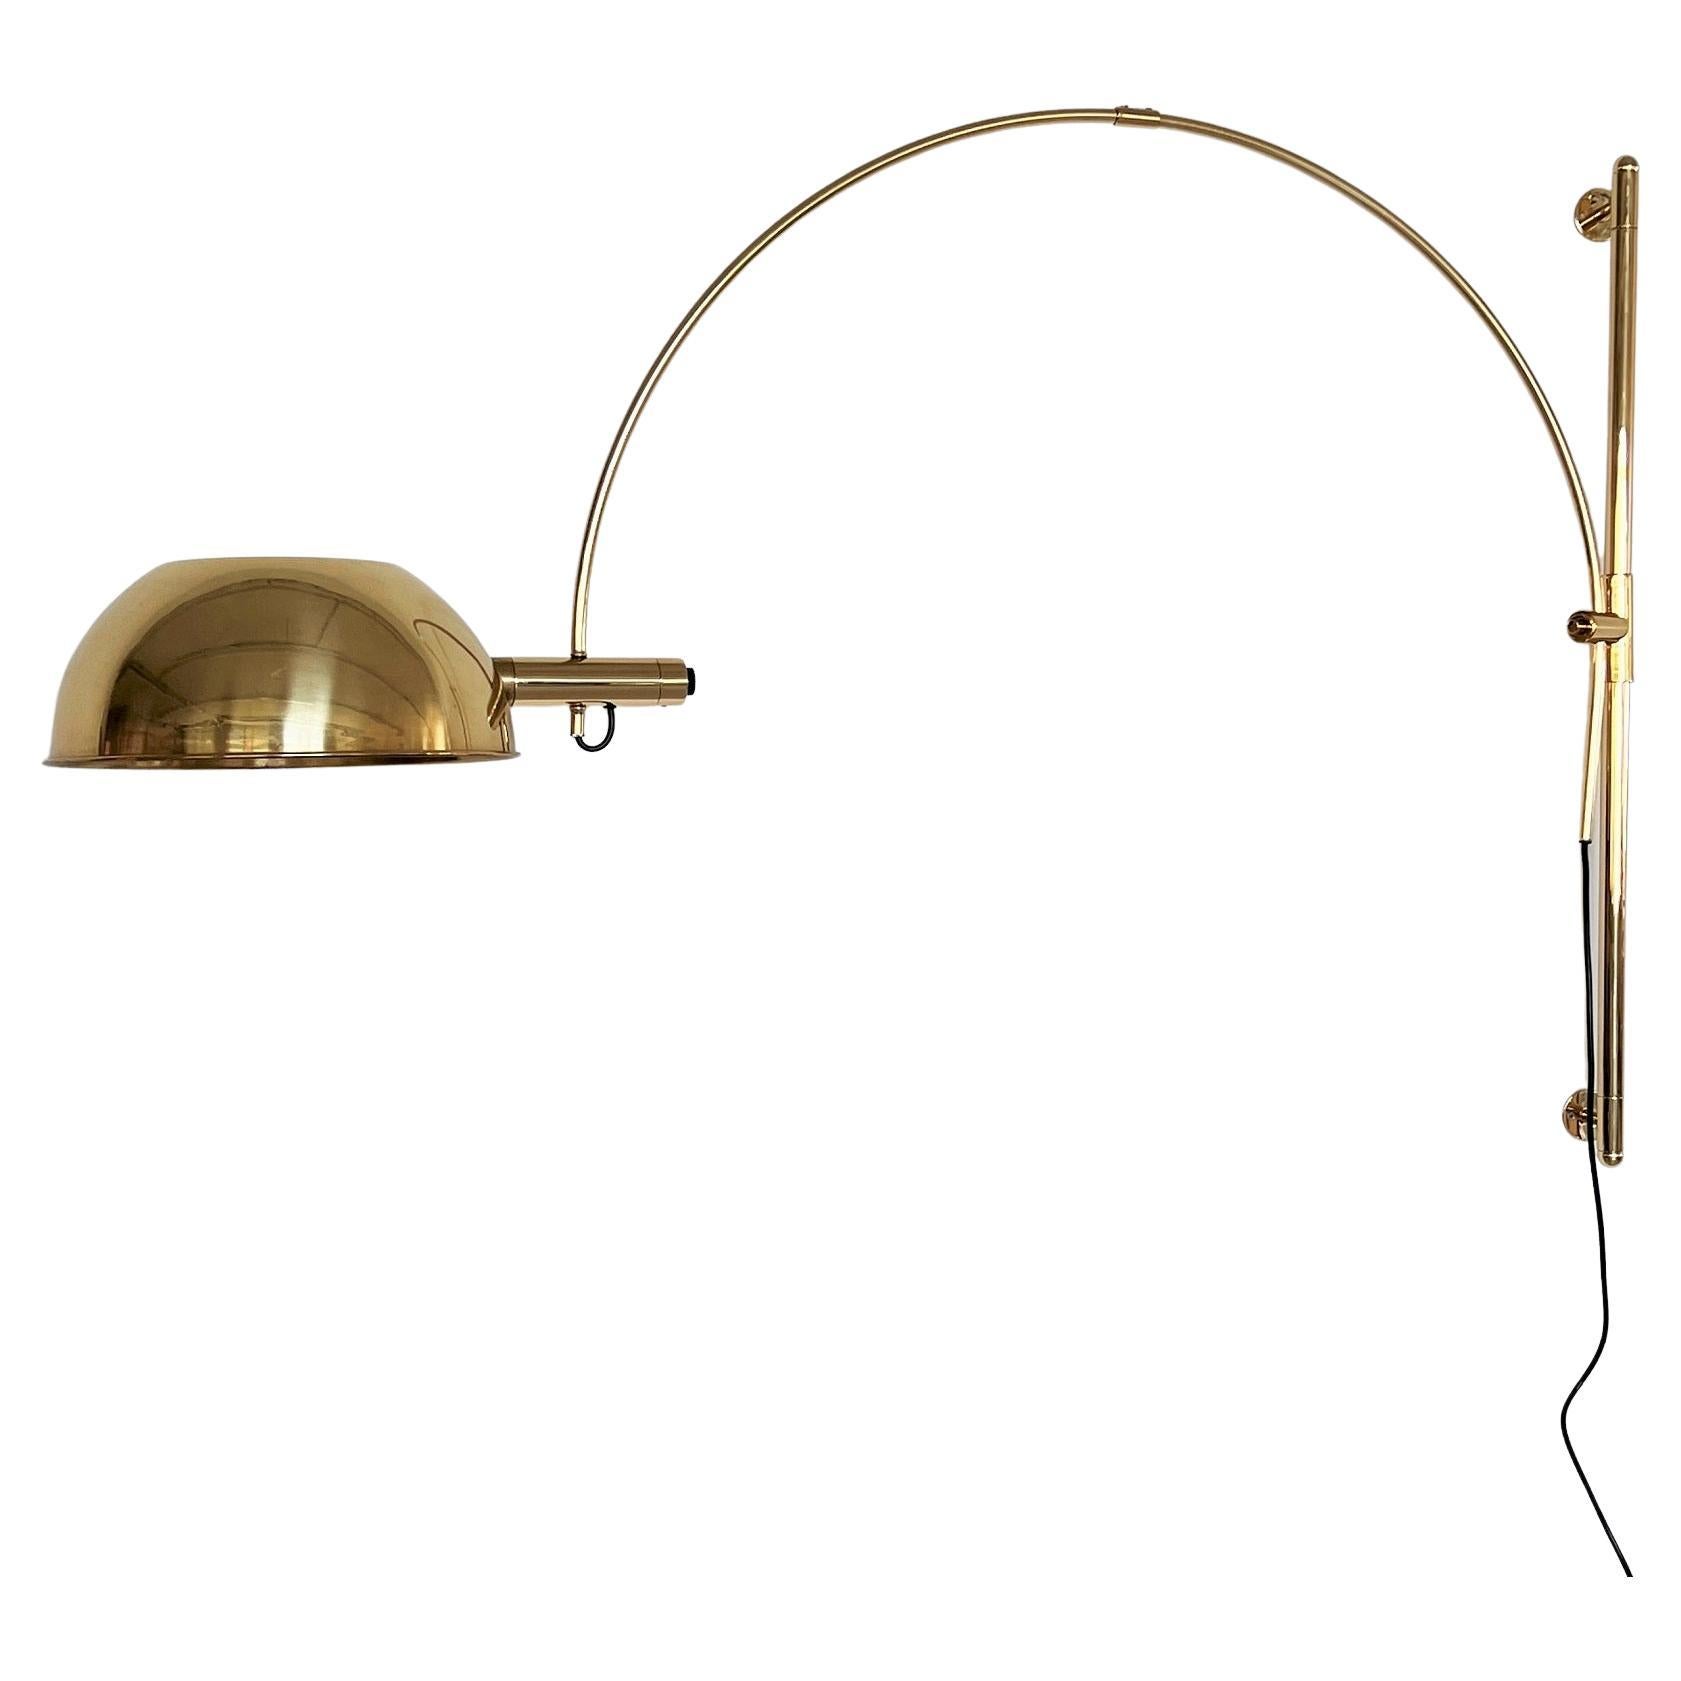 Florian Schulz Vintage Adjustable Wall Mounted Arc Lamp in Brass, 1970s